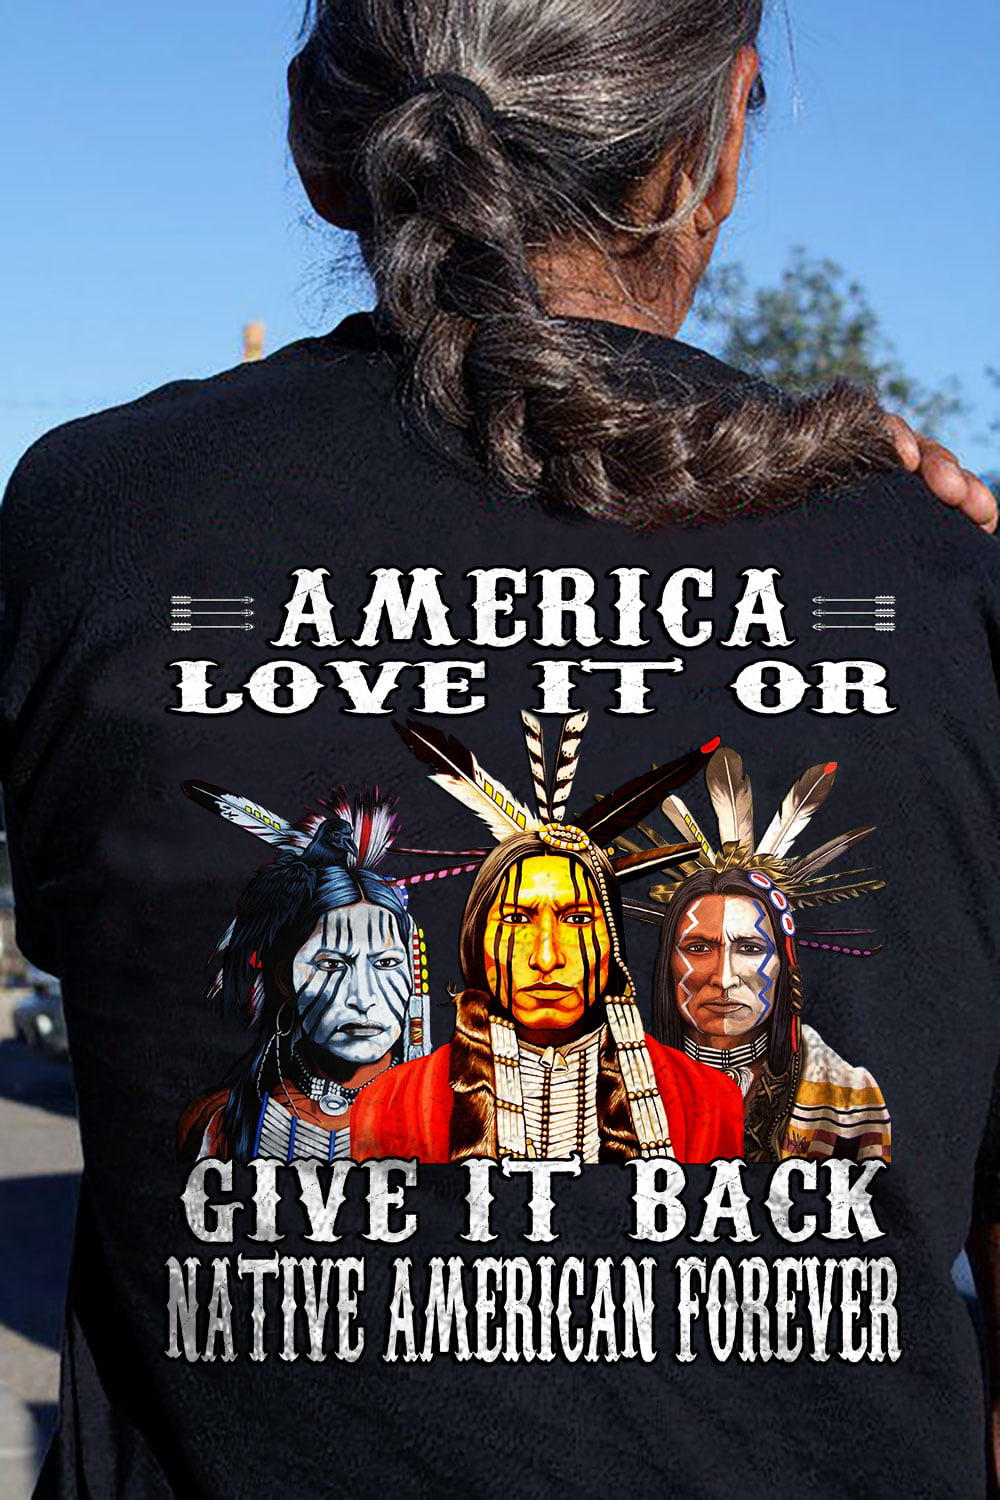 America love it or give it back – Native american forever